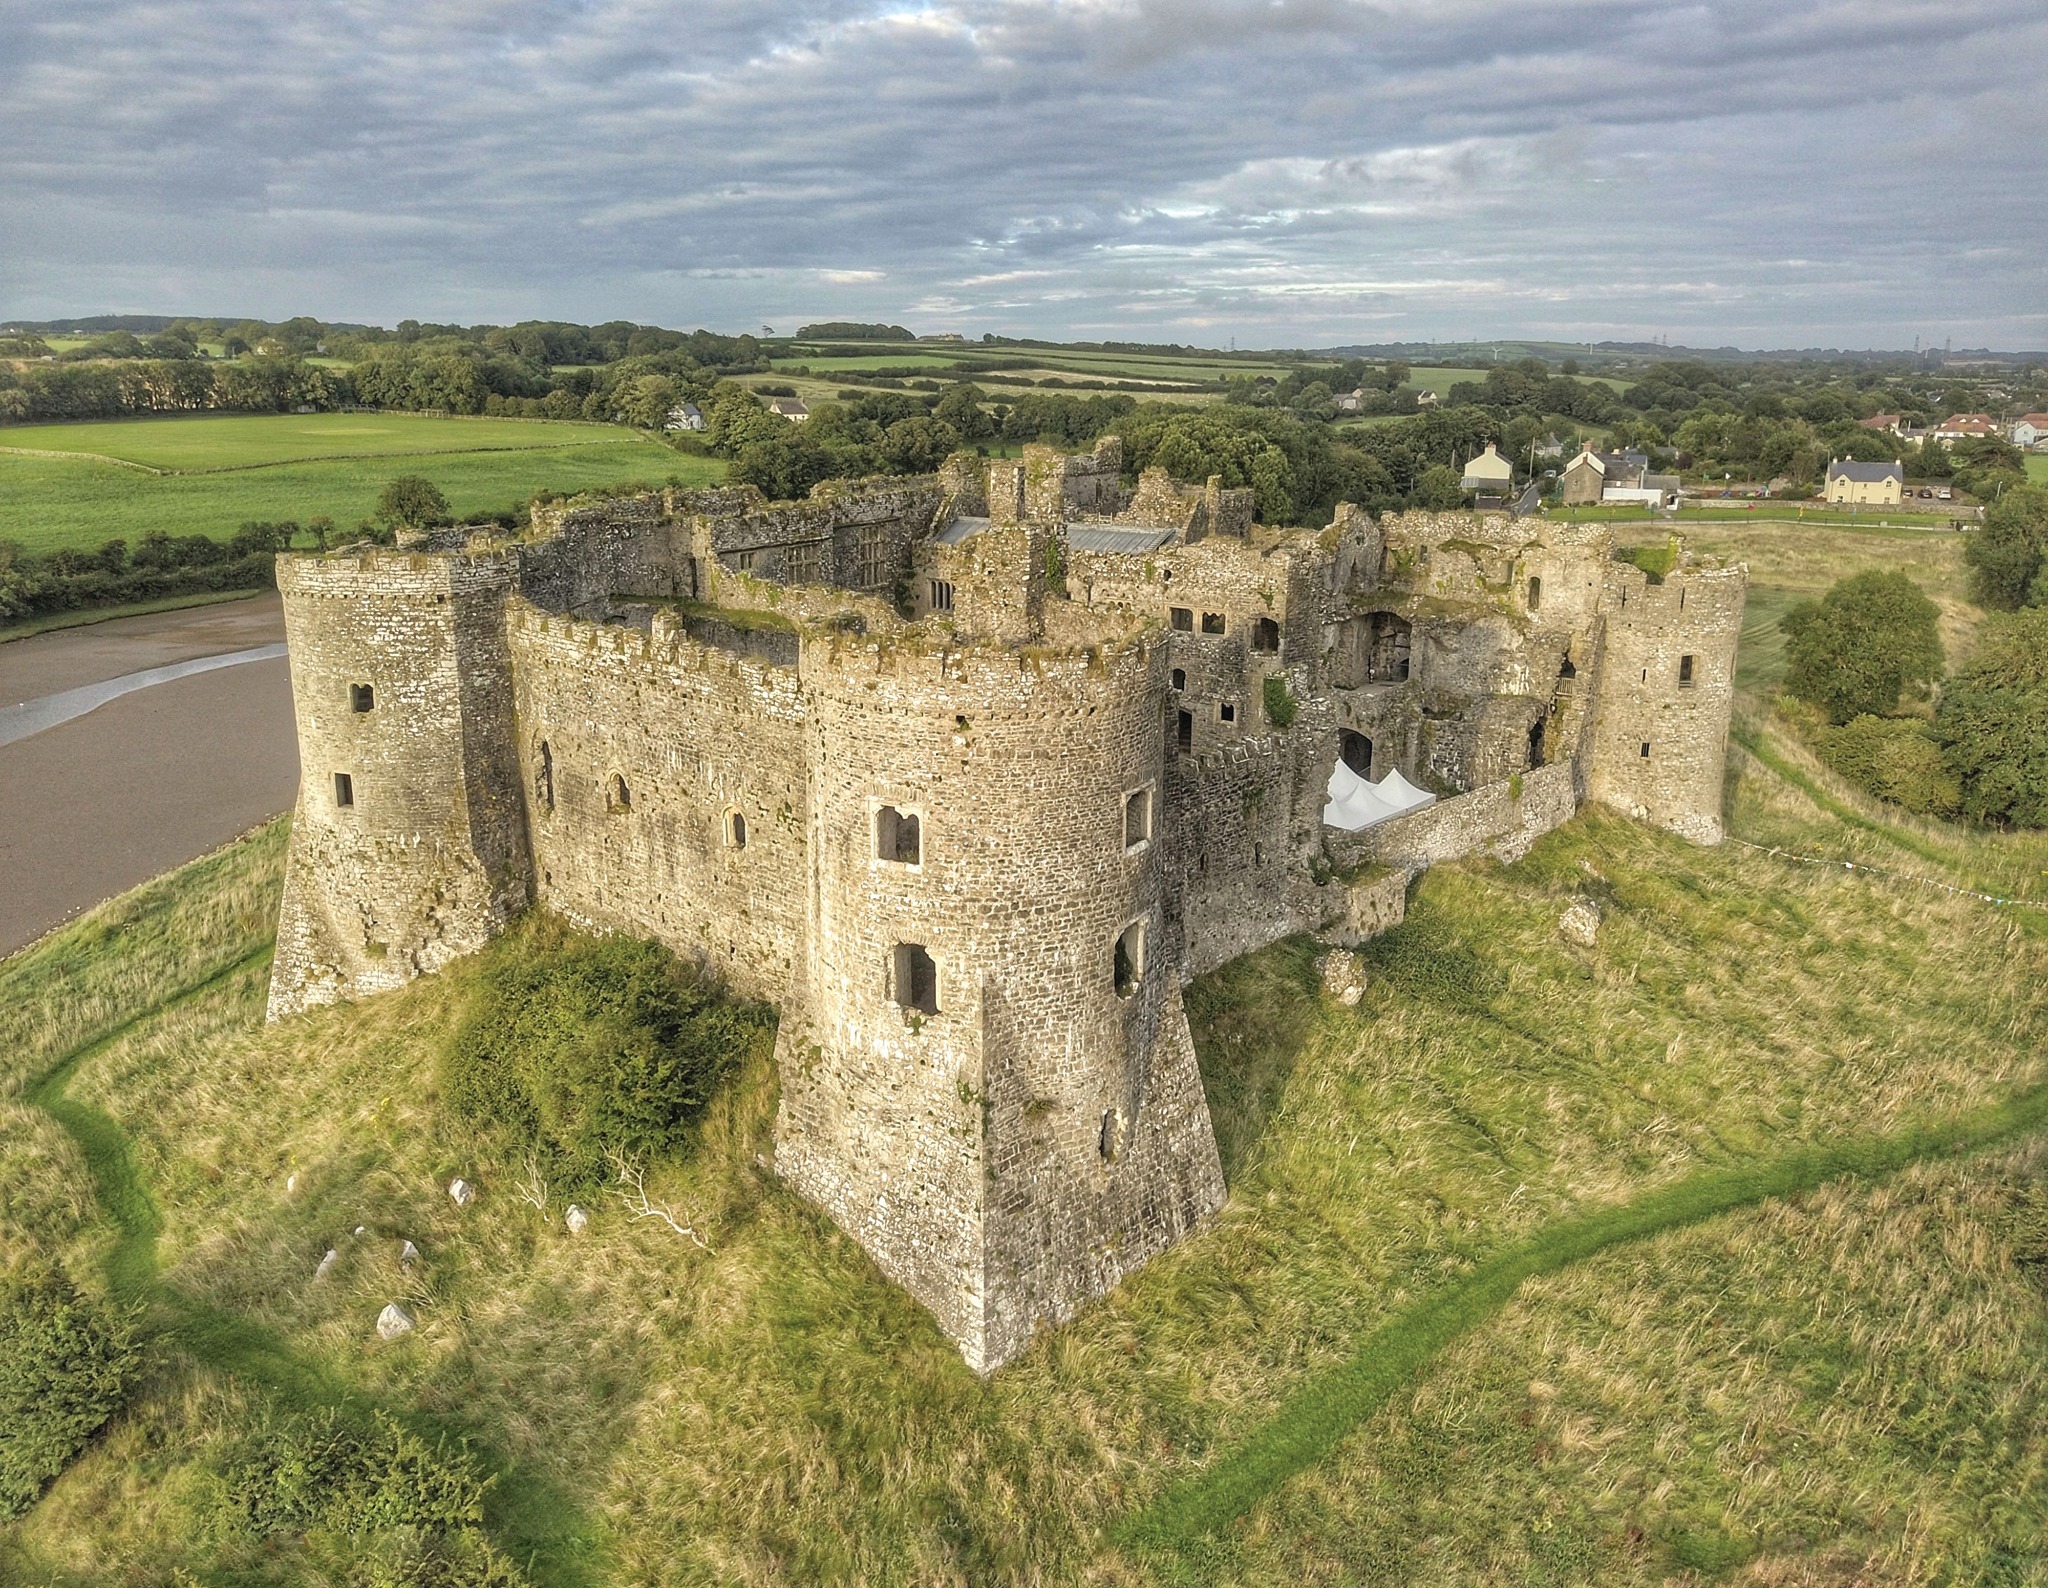 Aerial photograph of a ruined stone castle located next to a river